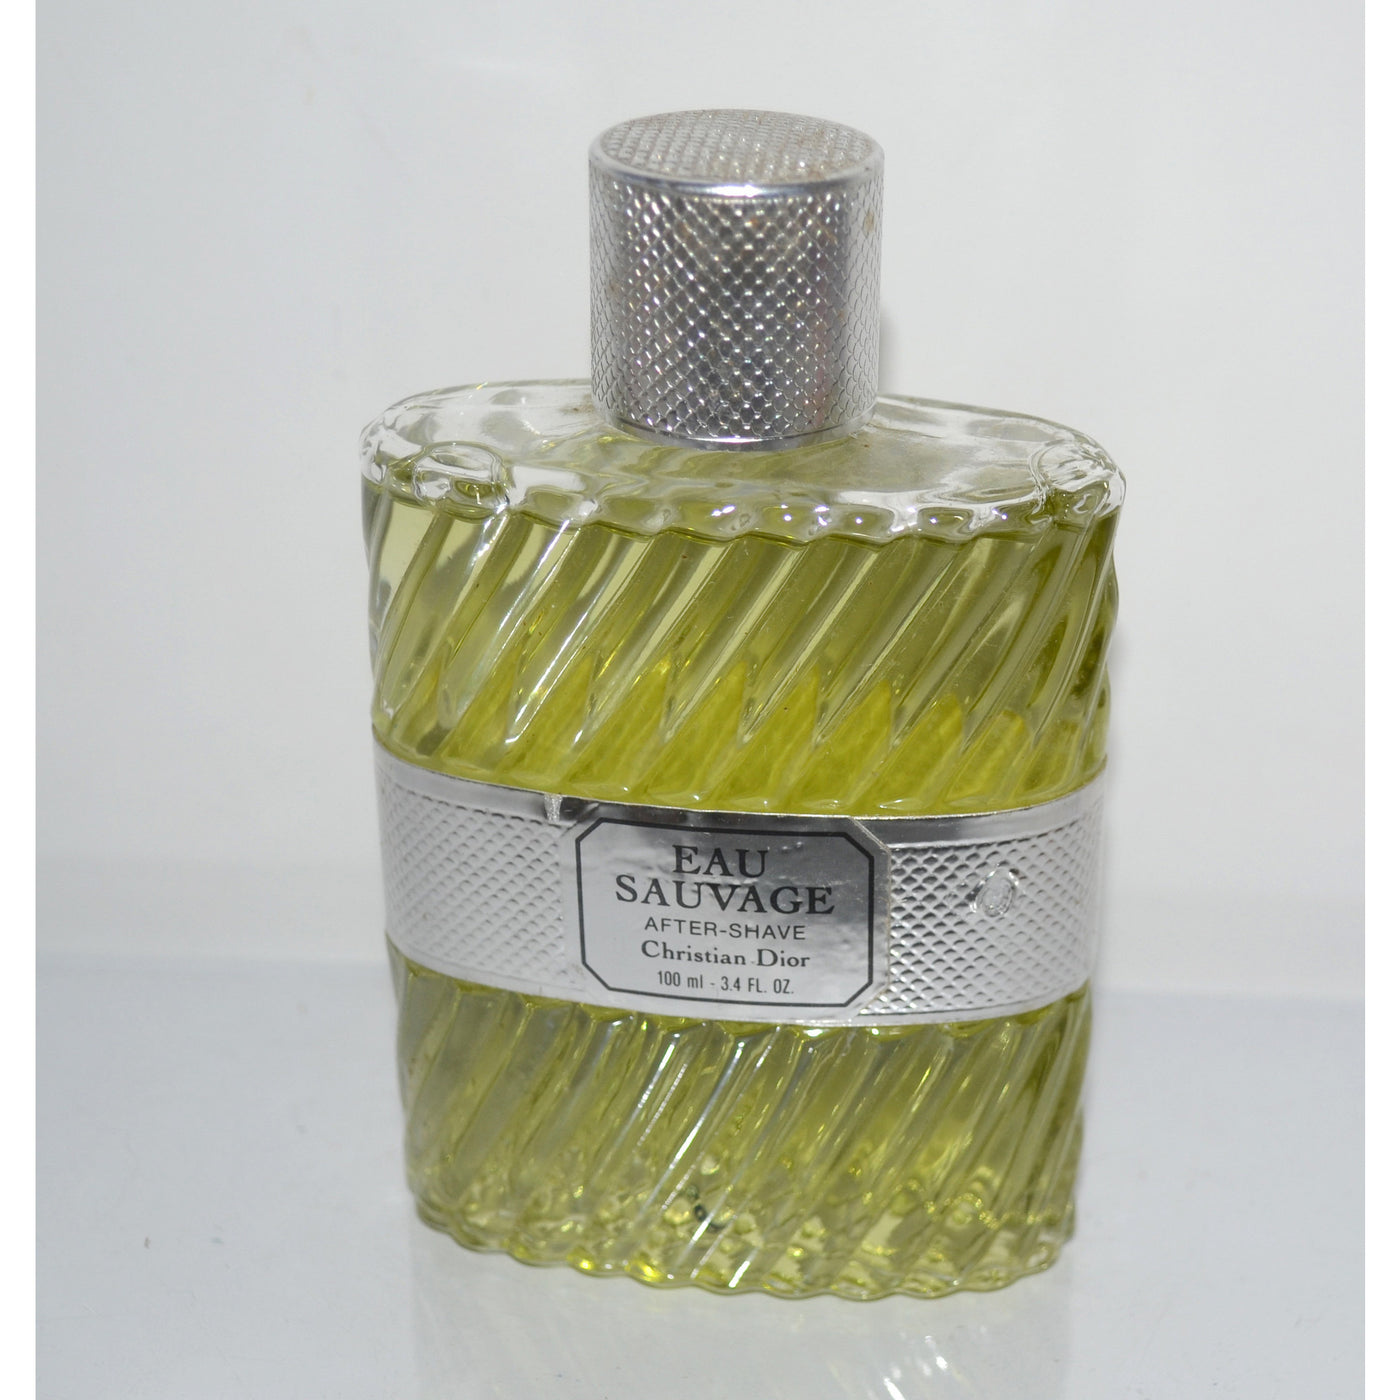 Vintage Eau Sauvage After Shave By Christian Dior